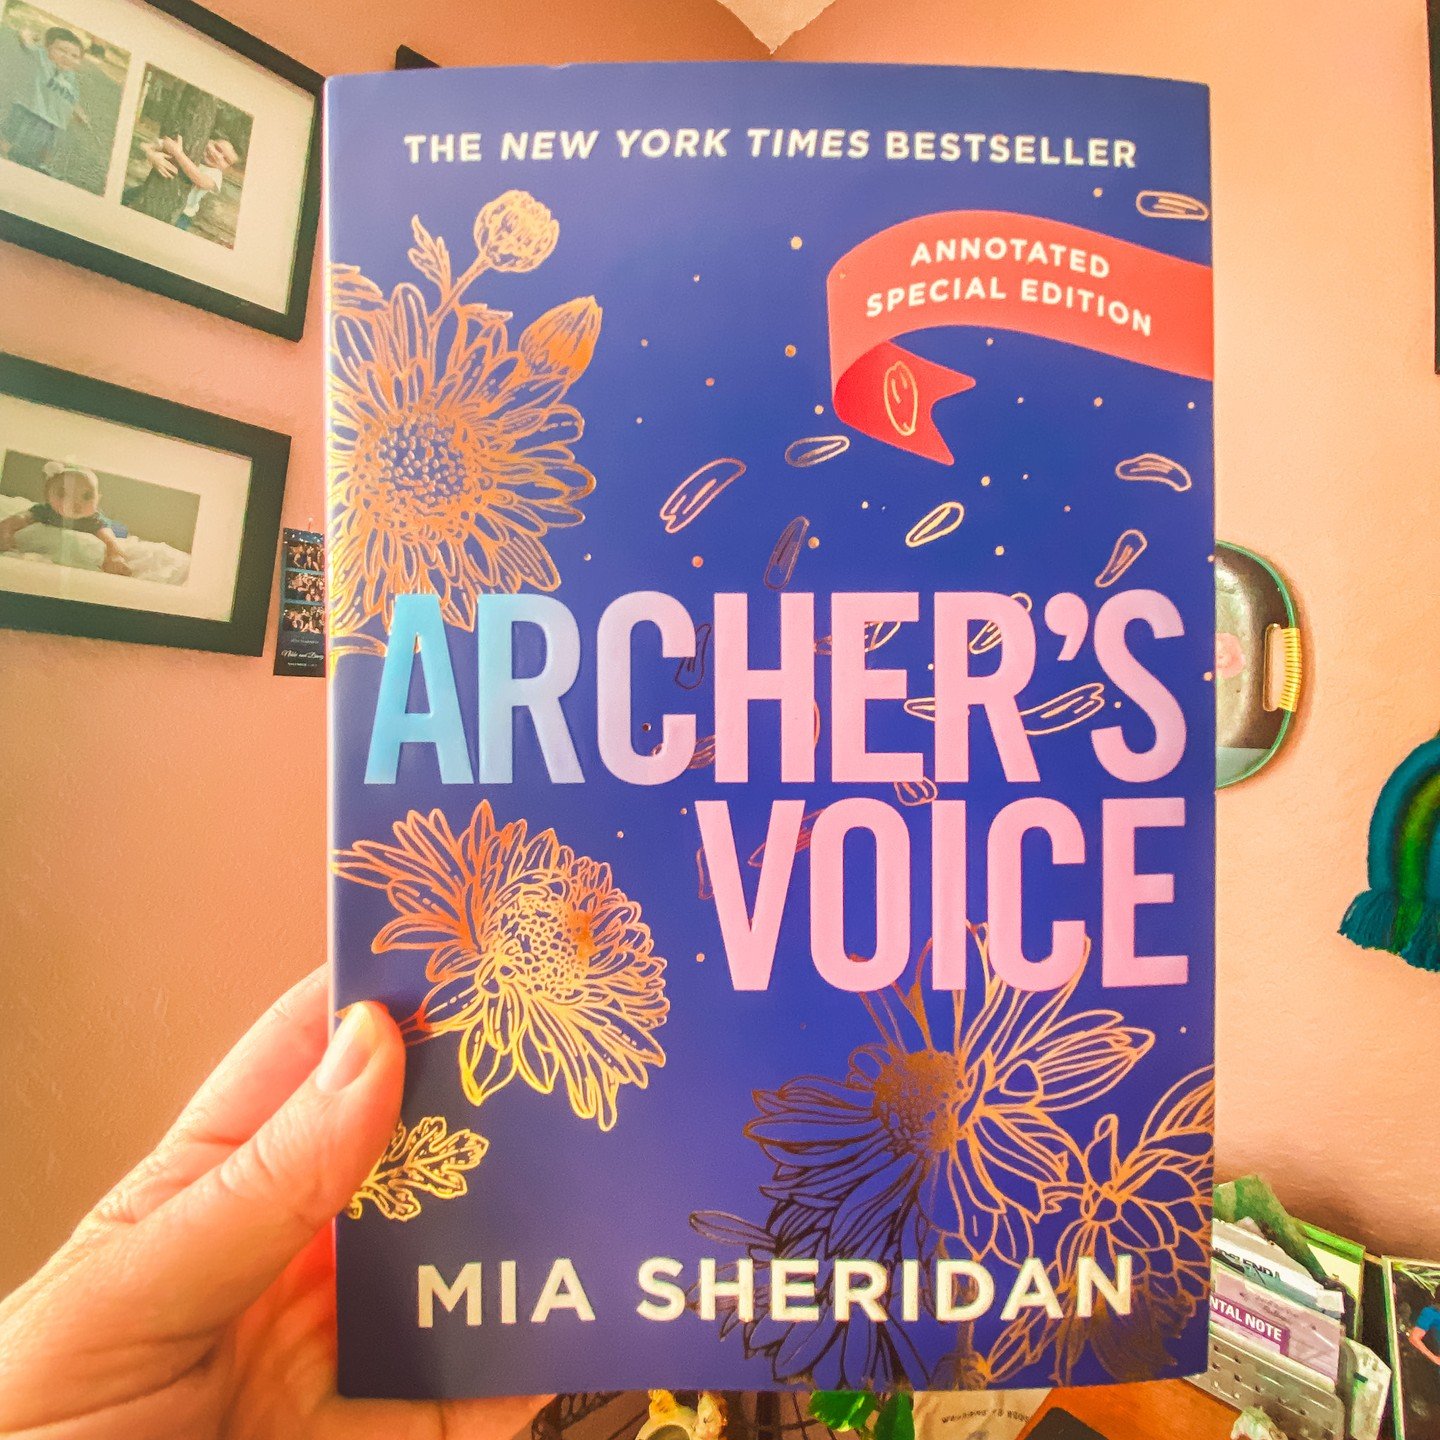 🌟📖 Just wanted to share my love and support for the incredibly talented indie author Mia Sheridan and her masterpiece, Archer's Voice. I read this book last year, and it profoundly affected me. Mia has woven a love story unlike any I&rsquo;ve ever 